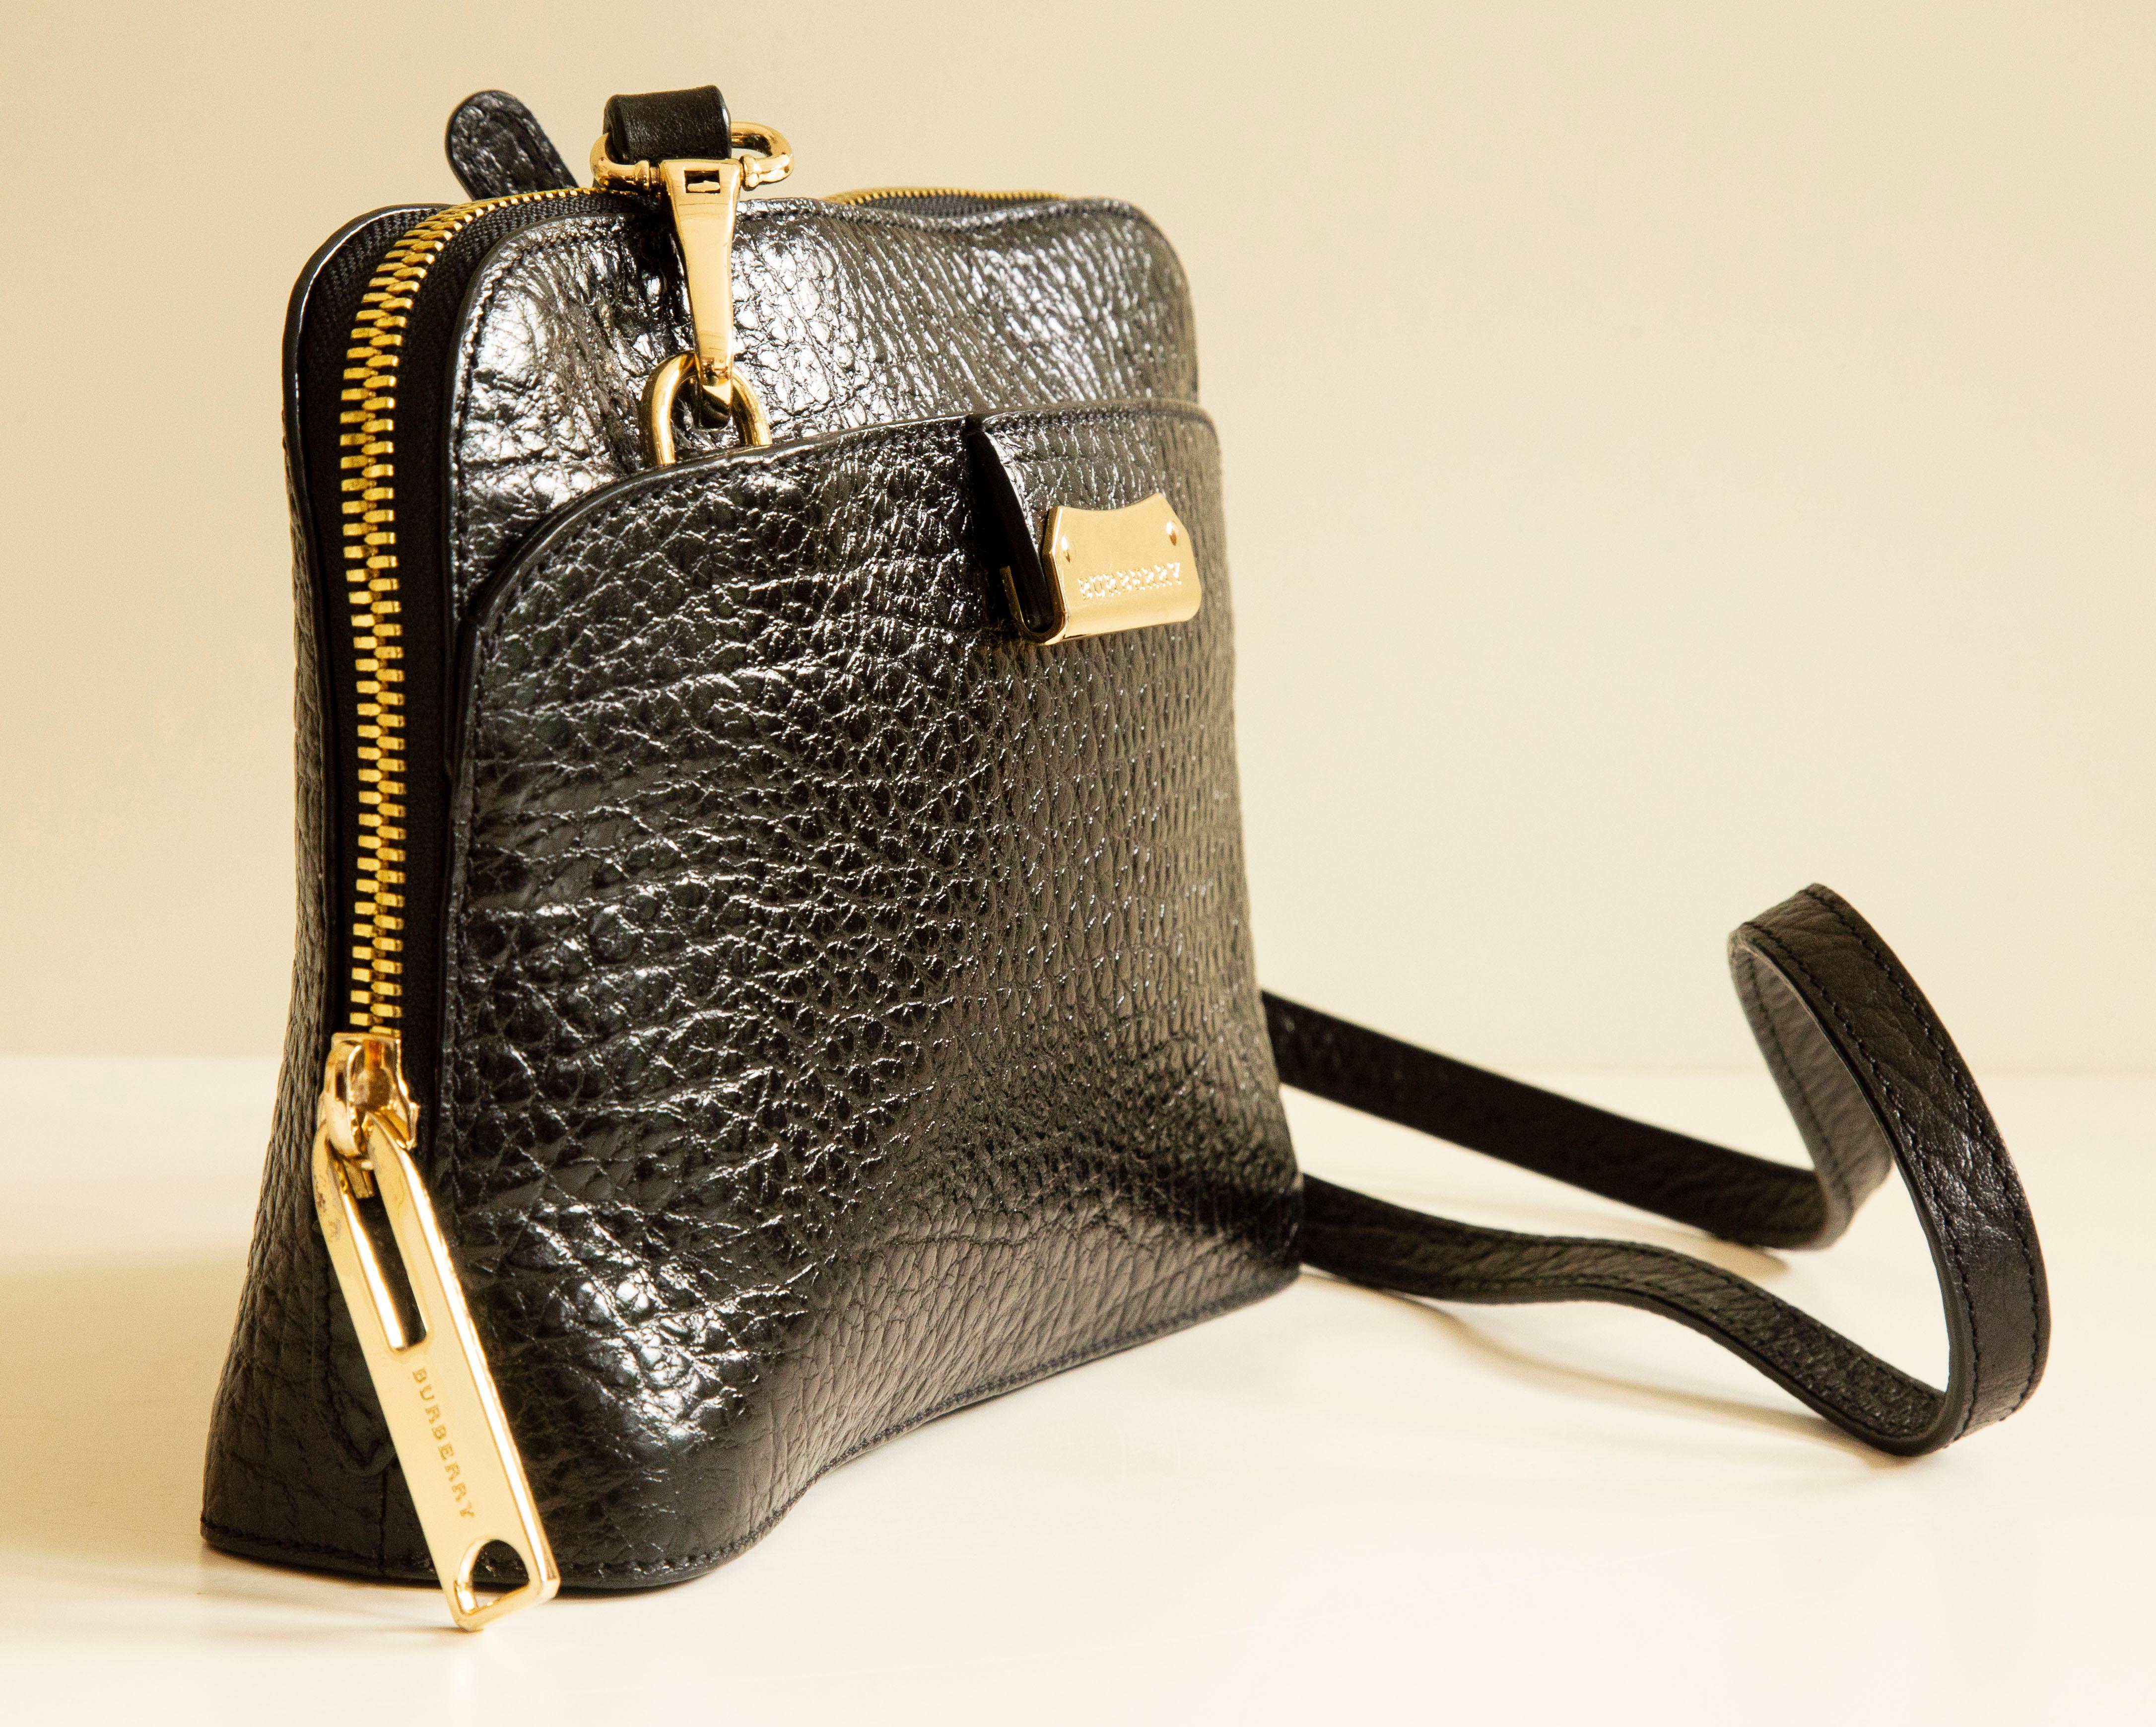 A Burberry shoulder bag/crossbody bag  made of black shiny and textured leather with gold toned hardware. The interior is lined with black fabric and it features a major compartment and two side pockets of which one has a zipper. The shoulder strap